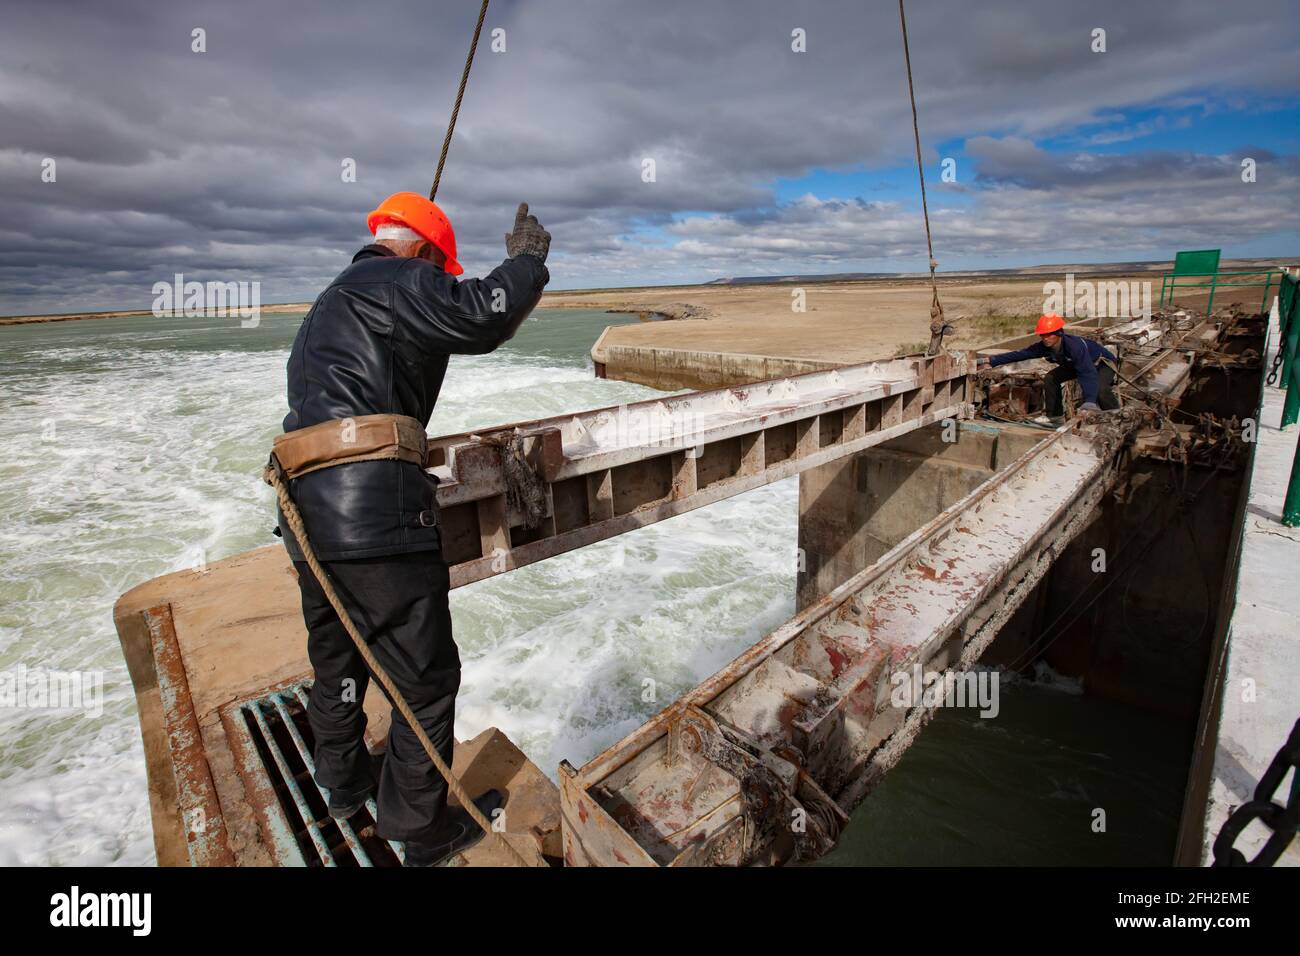 Kok-aral,Kazakhstan:Small Aral Sea dam.Workers in orange hardhat, safety belts.Lifts water shutter.Left worker show hand signal to crane operator. Stock Photo